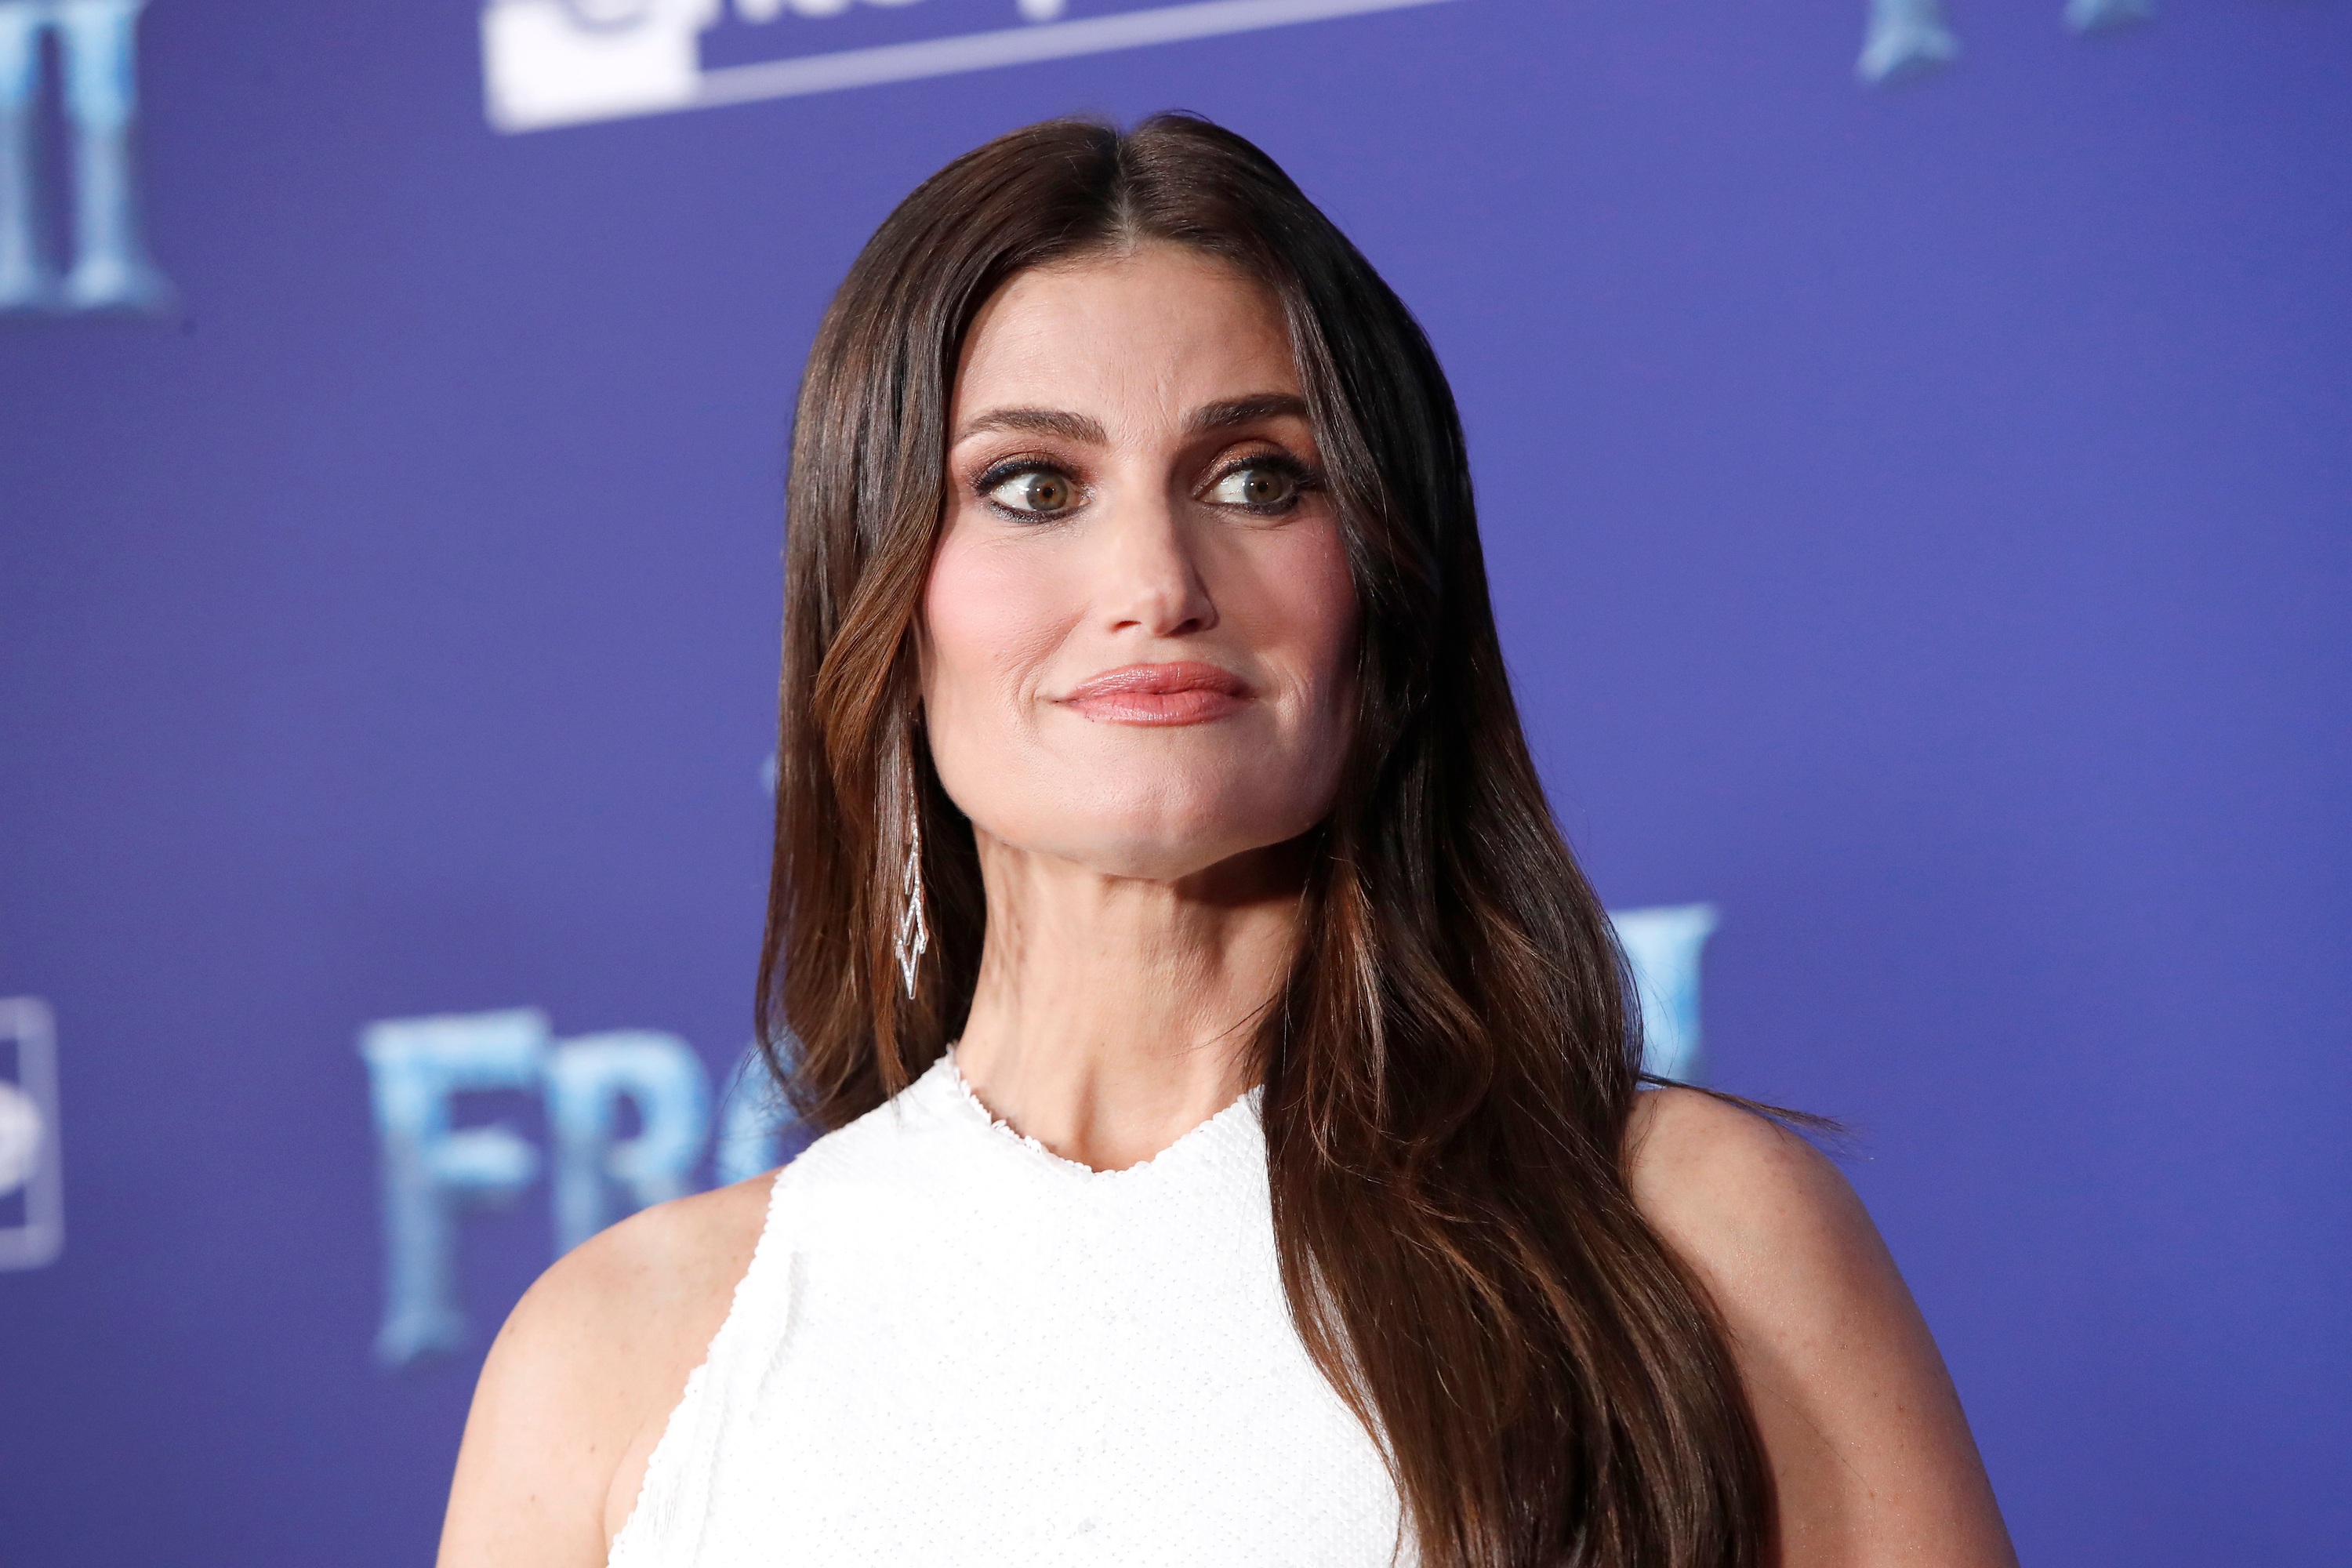 Idina Menzel is making her Broadway comeback in a new musical next year